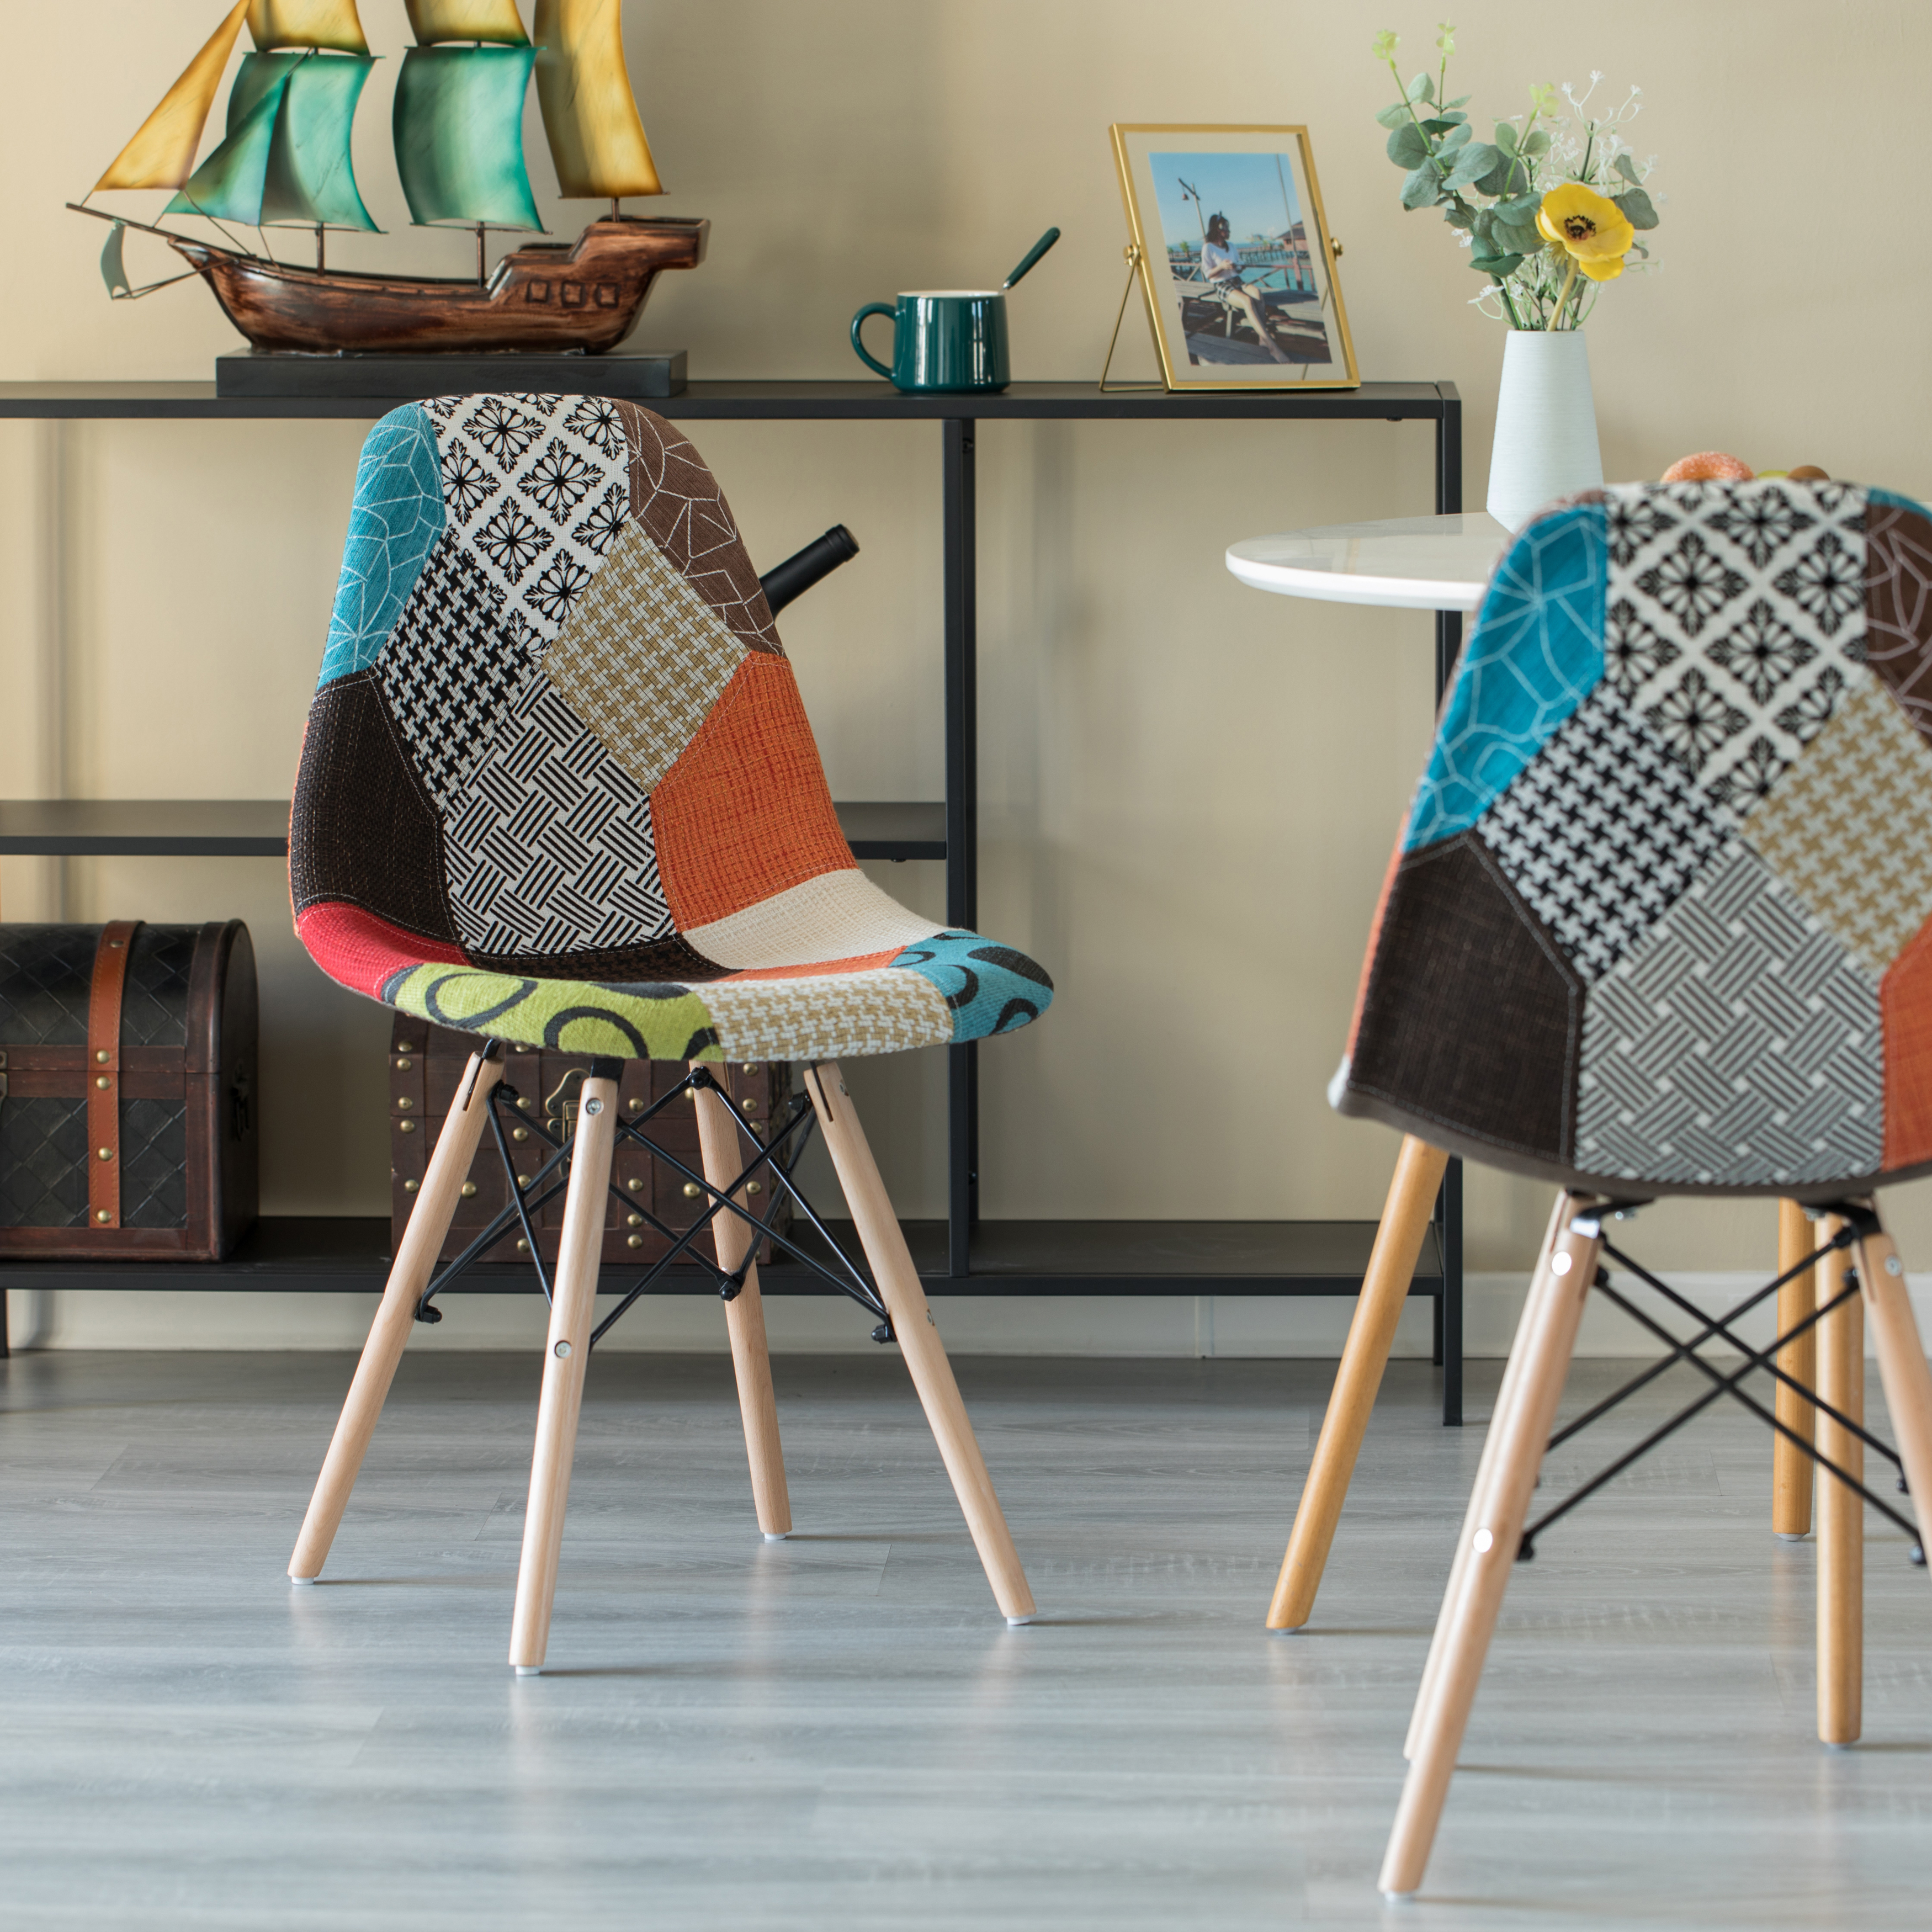 Modern Fabric Patchwork Chair With Wooden Legs For Kitchen, Dining Room, Entryway, Living Room - Set Of 2